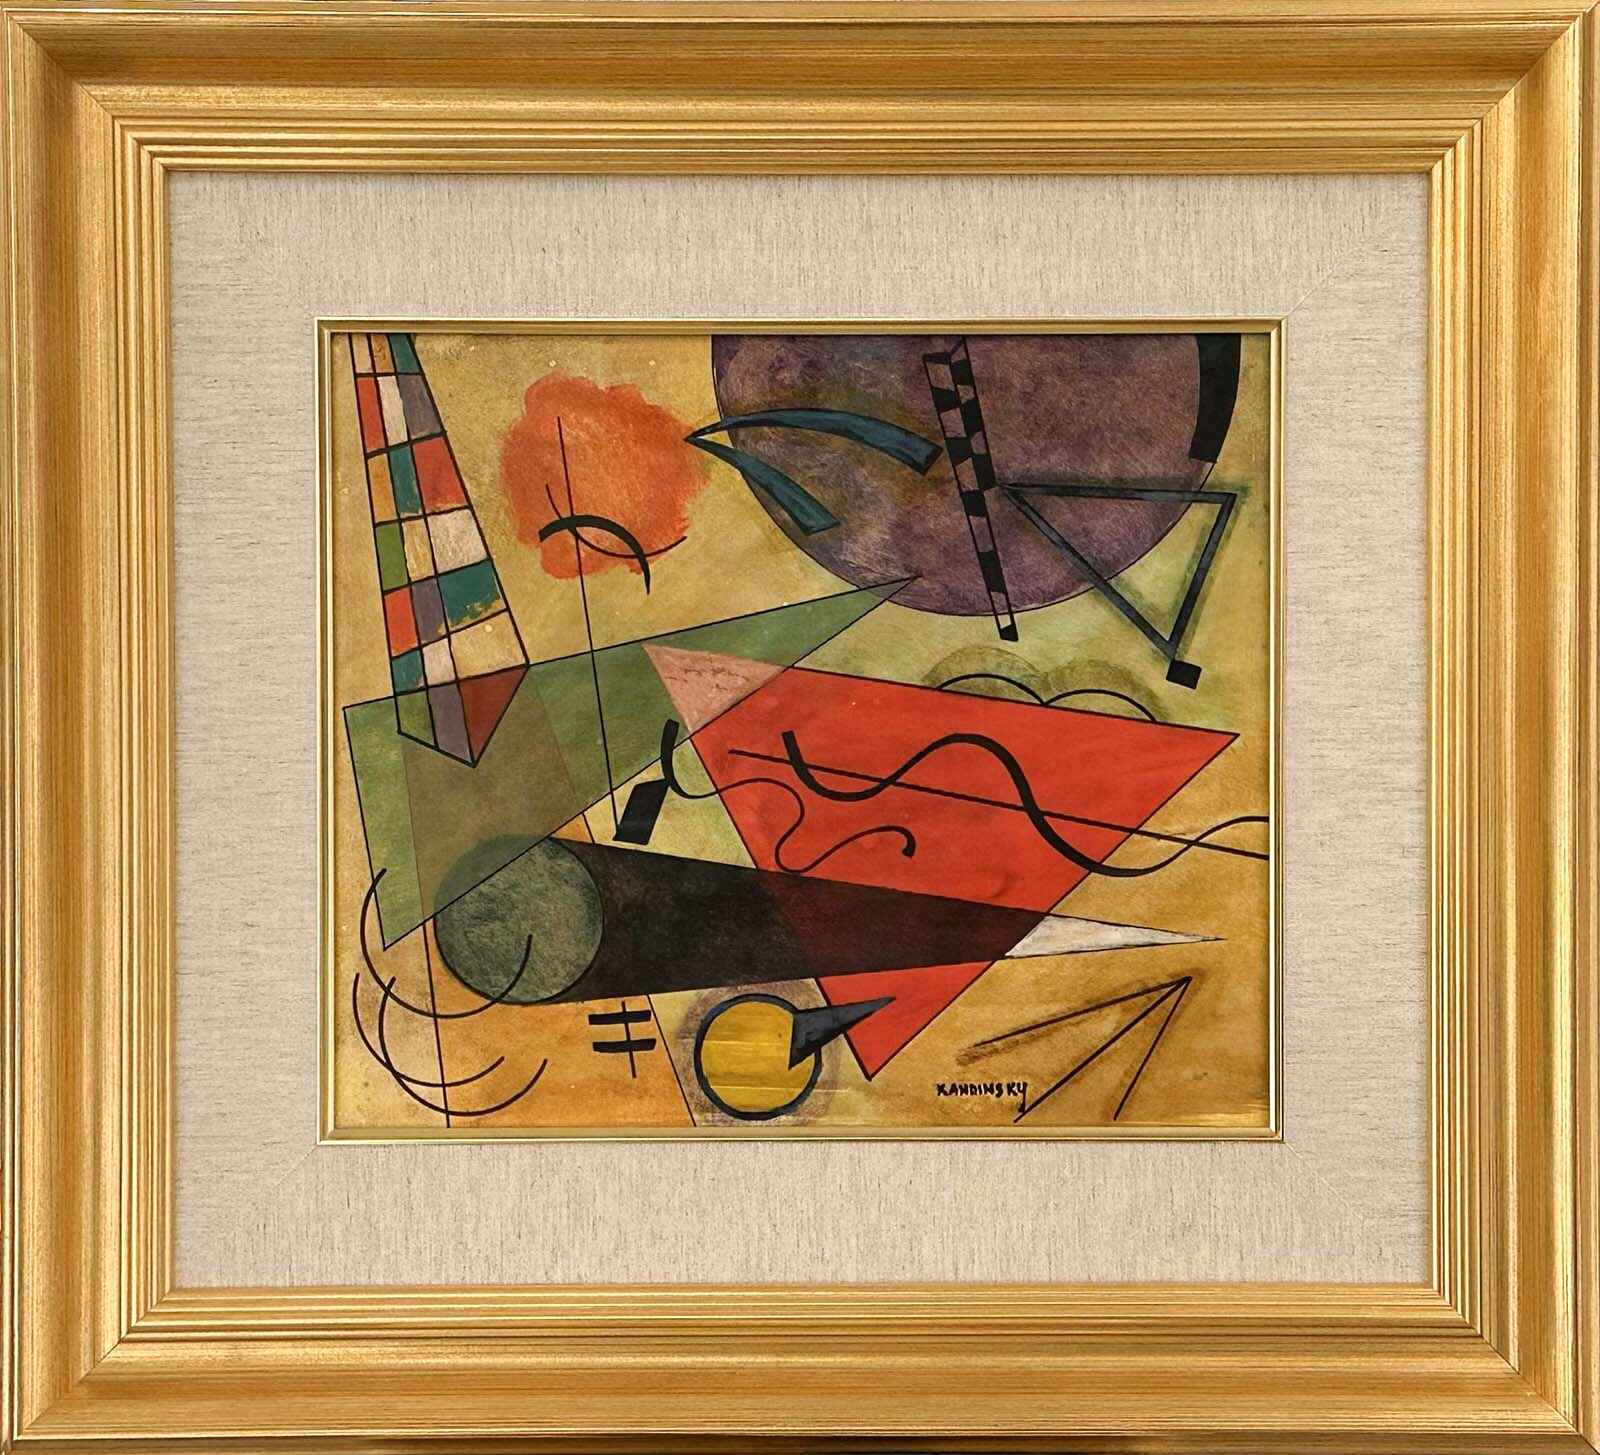 Old Masters work. Title: Untitled, 14 x 16.5 in, Mixed Media/Gouache on Paper by Wassily Kandinsky.